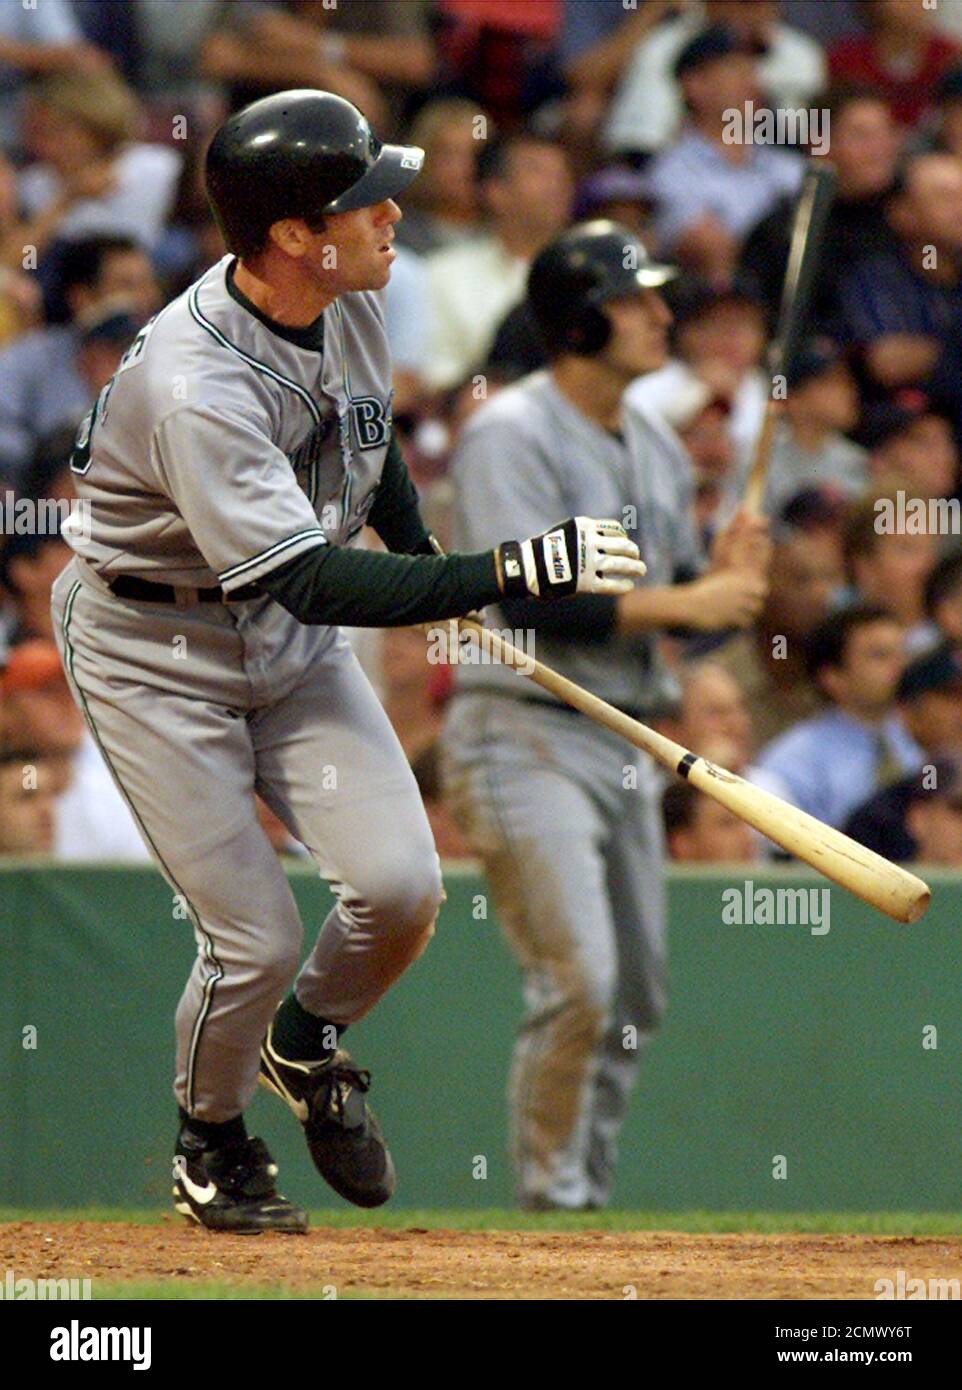 Tampa Bay Devil Rays Andy Sheets (L) and teammate Steve Cox (rear) watch as Sheets' three-run home run off Red Sox pitcher Frank Castillo clears Fenway Park's 'Green Monster' left field wall July 24, 2002 to cap a six-run second inning for Tampa Bay in Boston. Sheets drove in teammates Randy Winn and Carl Crawford. REUTERS/Jim Bourg  JRB Stock Photo